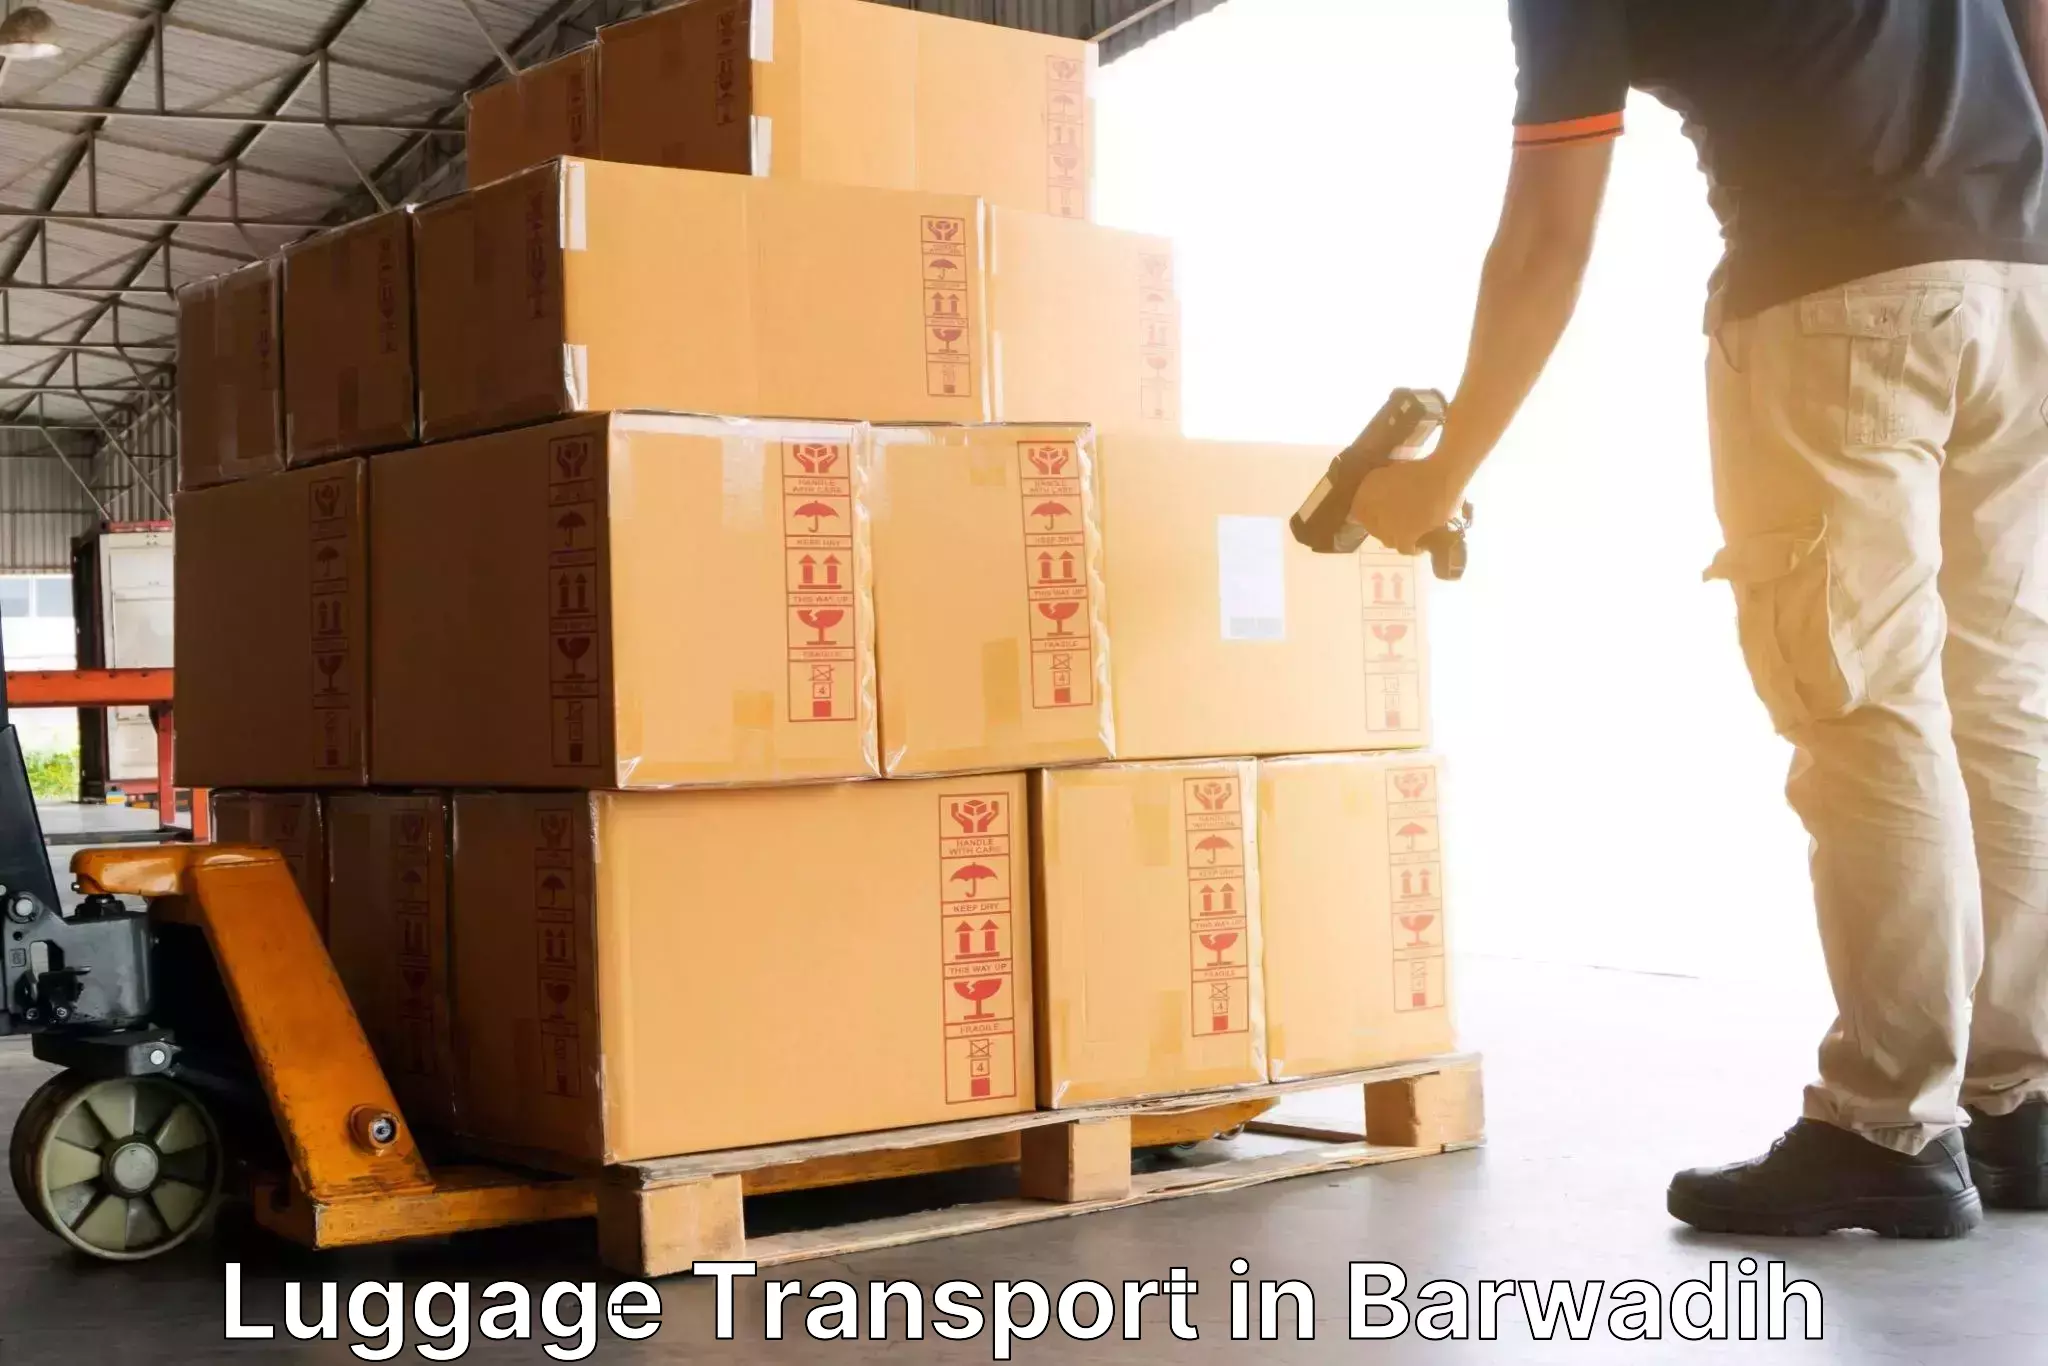 Instant baggage transport quote in Barwadih